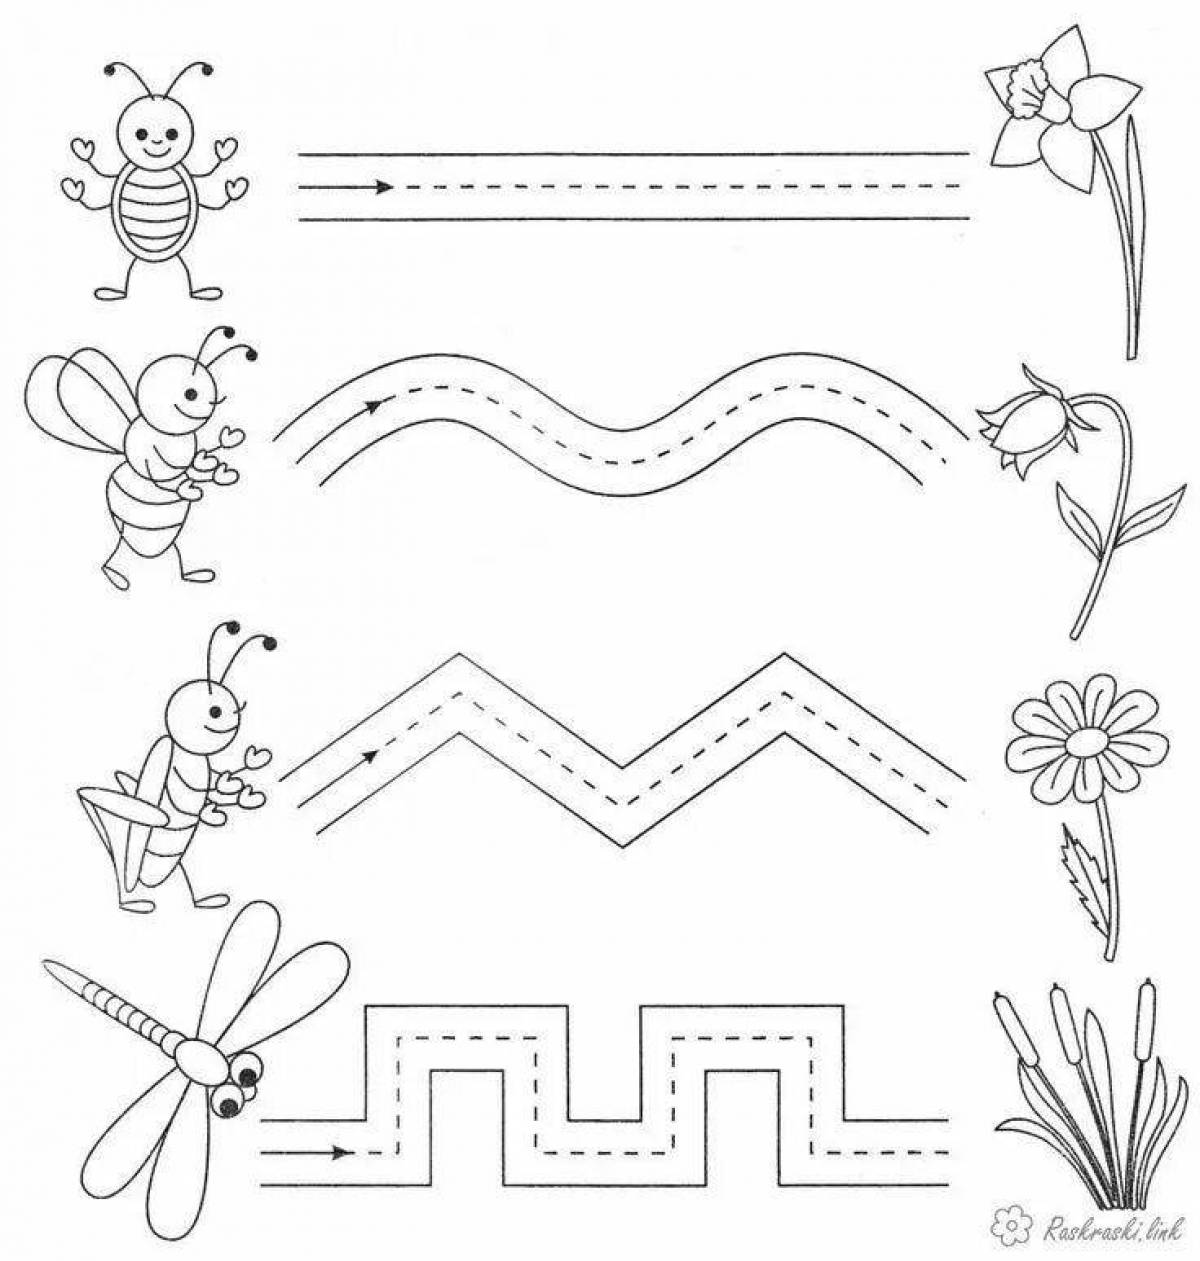 Adorable track coloring page